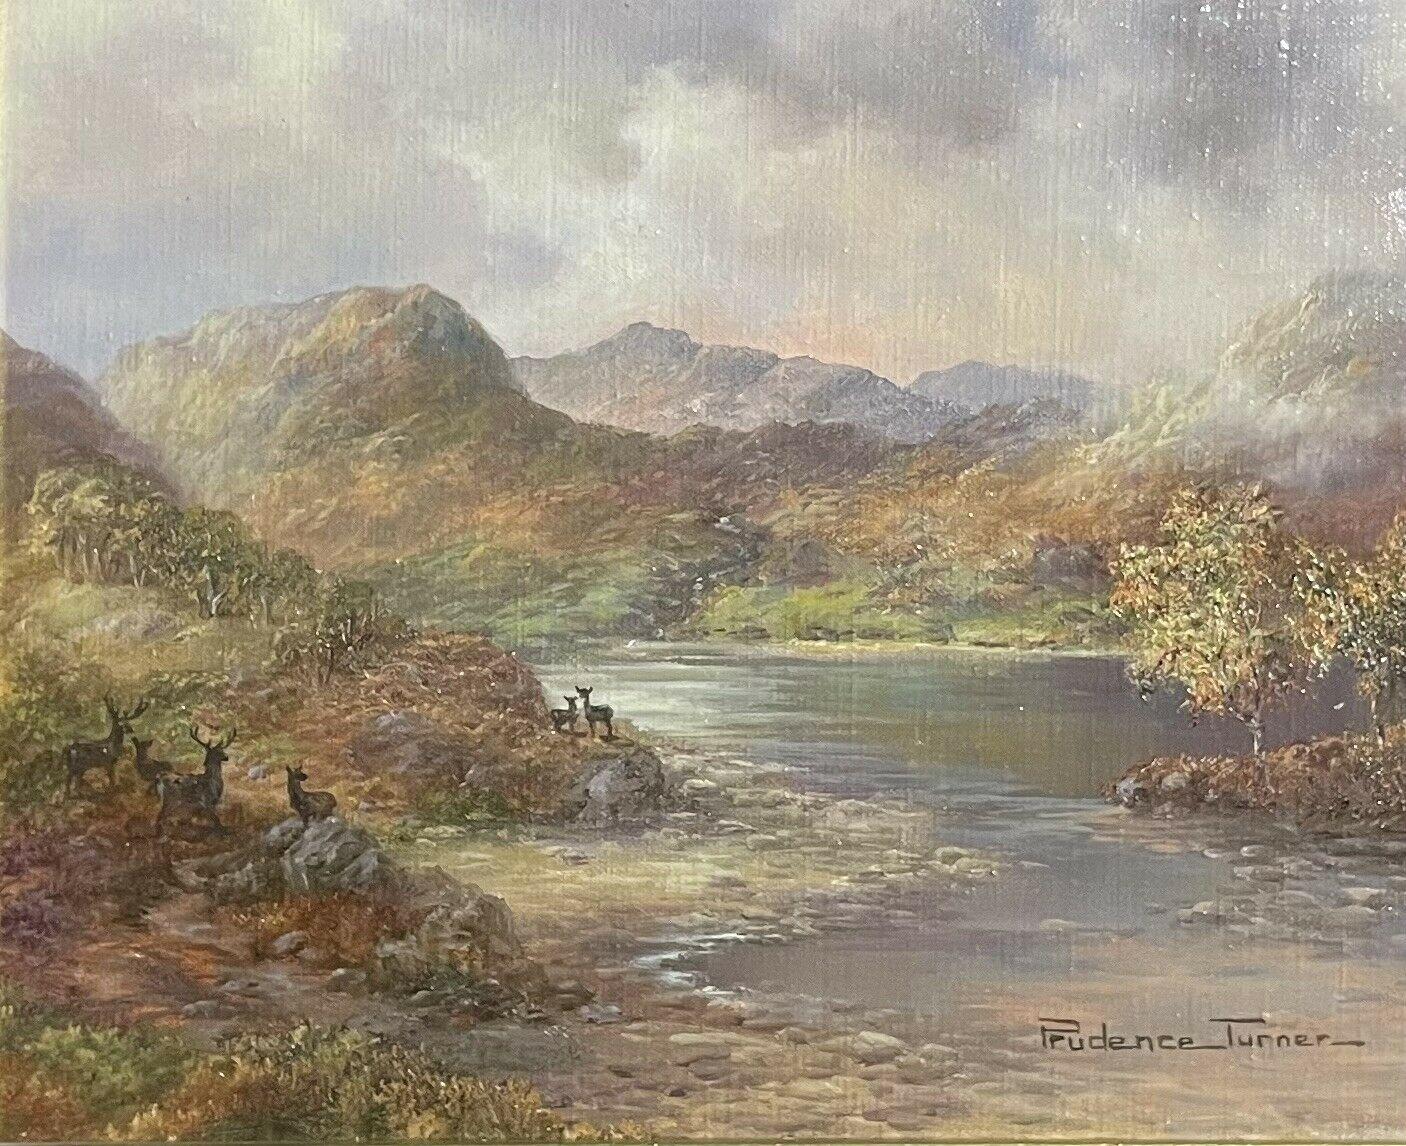 Prudence Turner Landscape Painting - Scottish Highlands with Stags by Loch, signed Original British Oil Painting